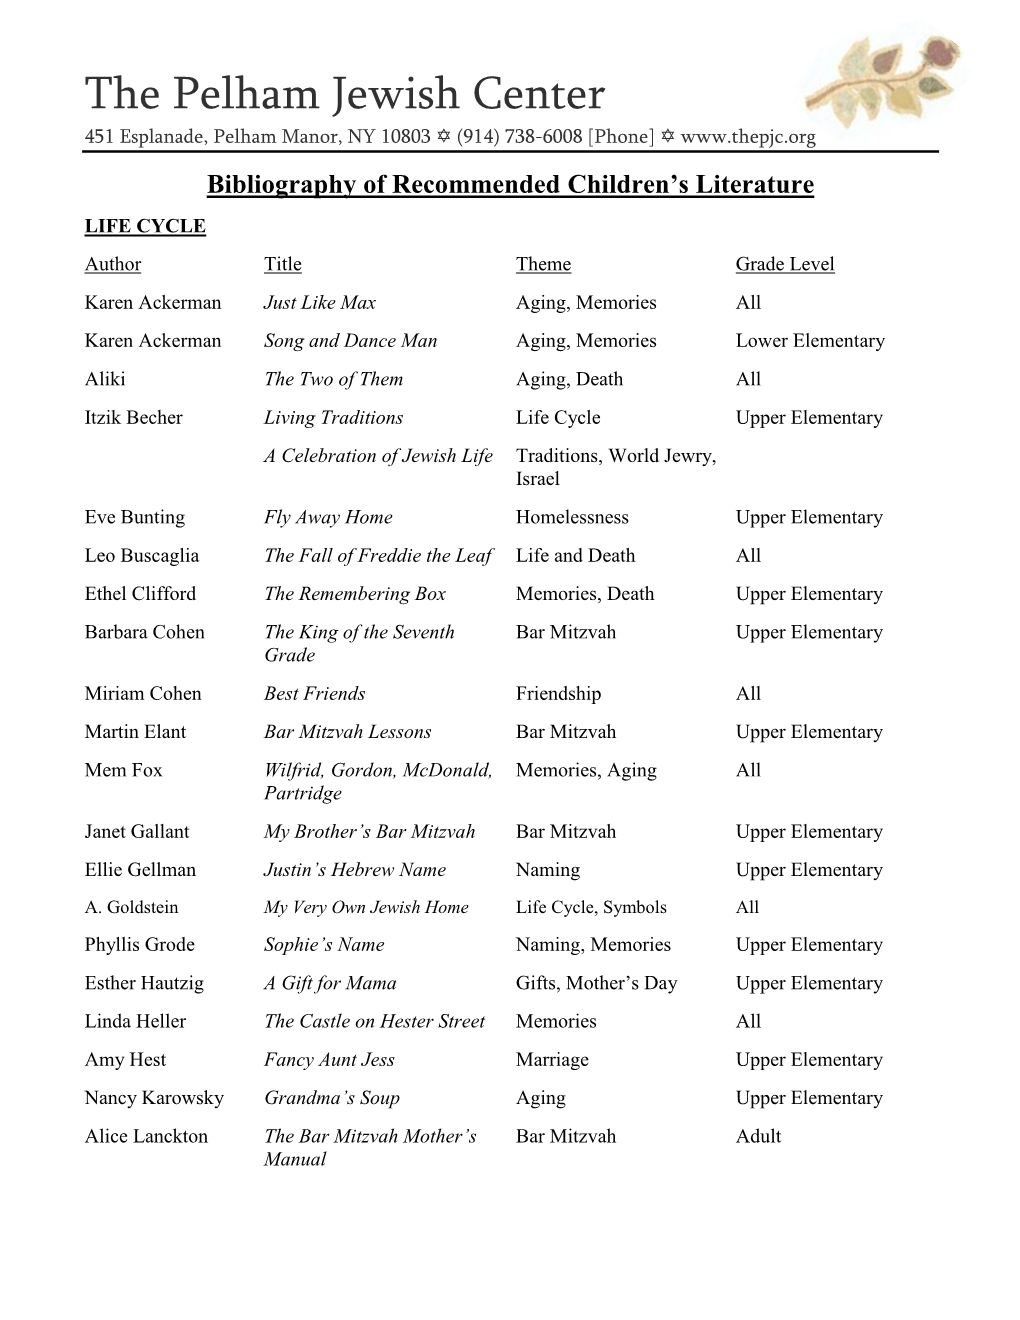 Bibliography of Recommended Children's Literature